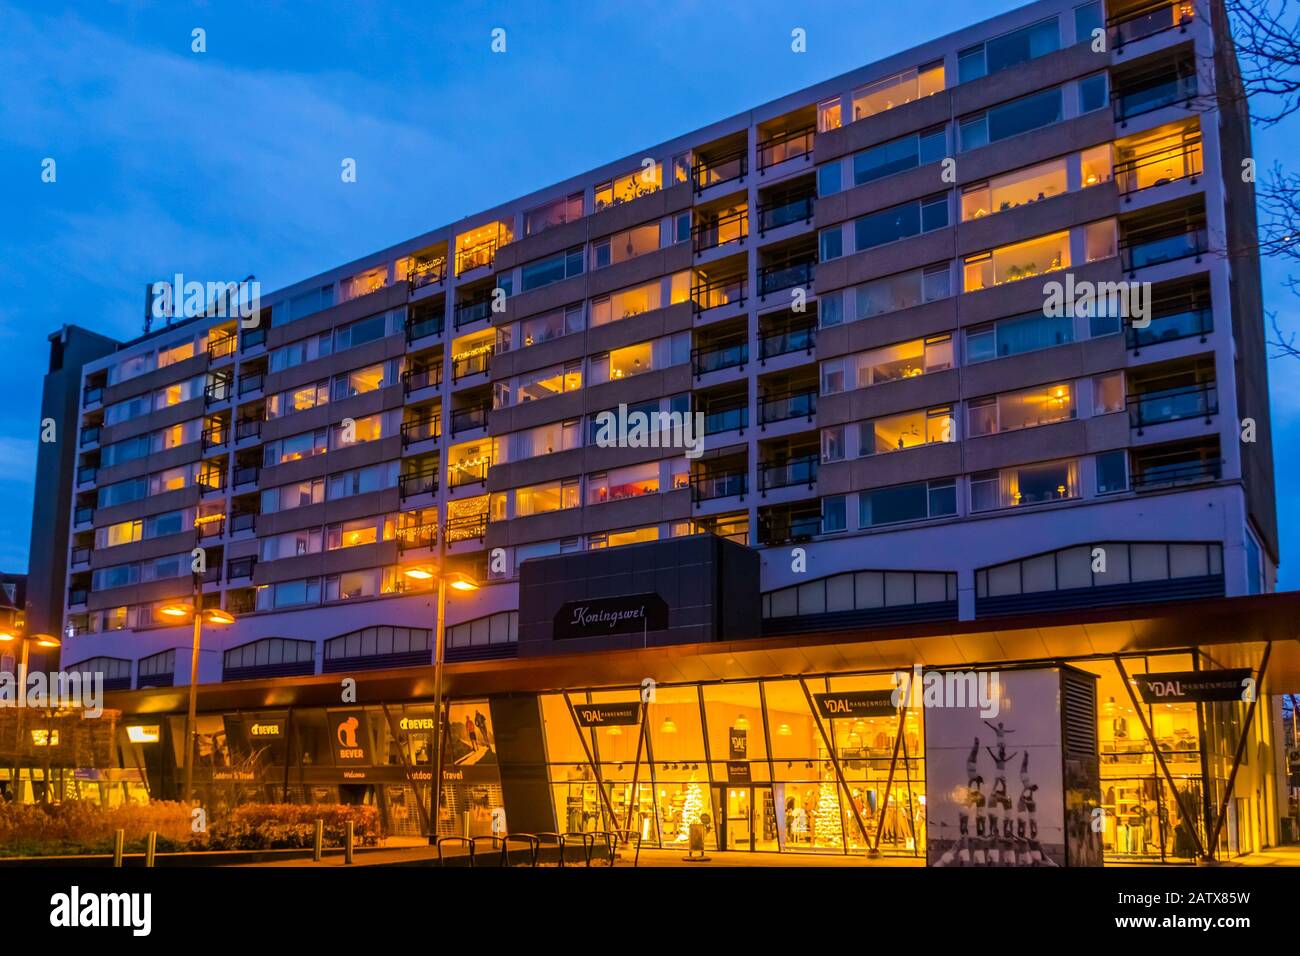 Shopping Mall With Apartments In The City Center Of Tilburg The Netherlands 10 December 19 Stock Photo Alamy